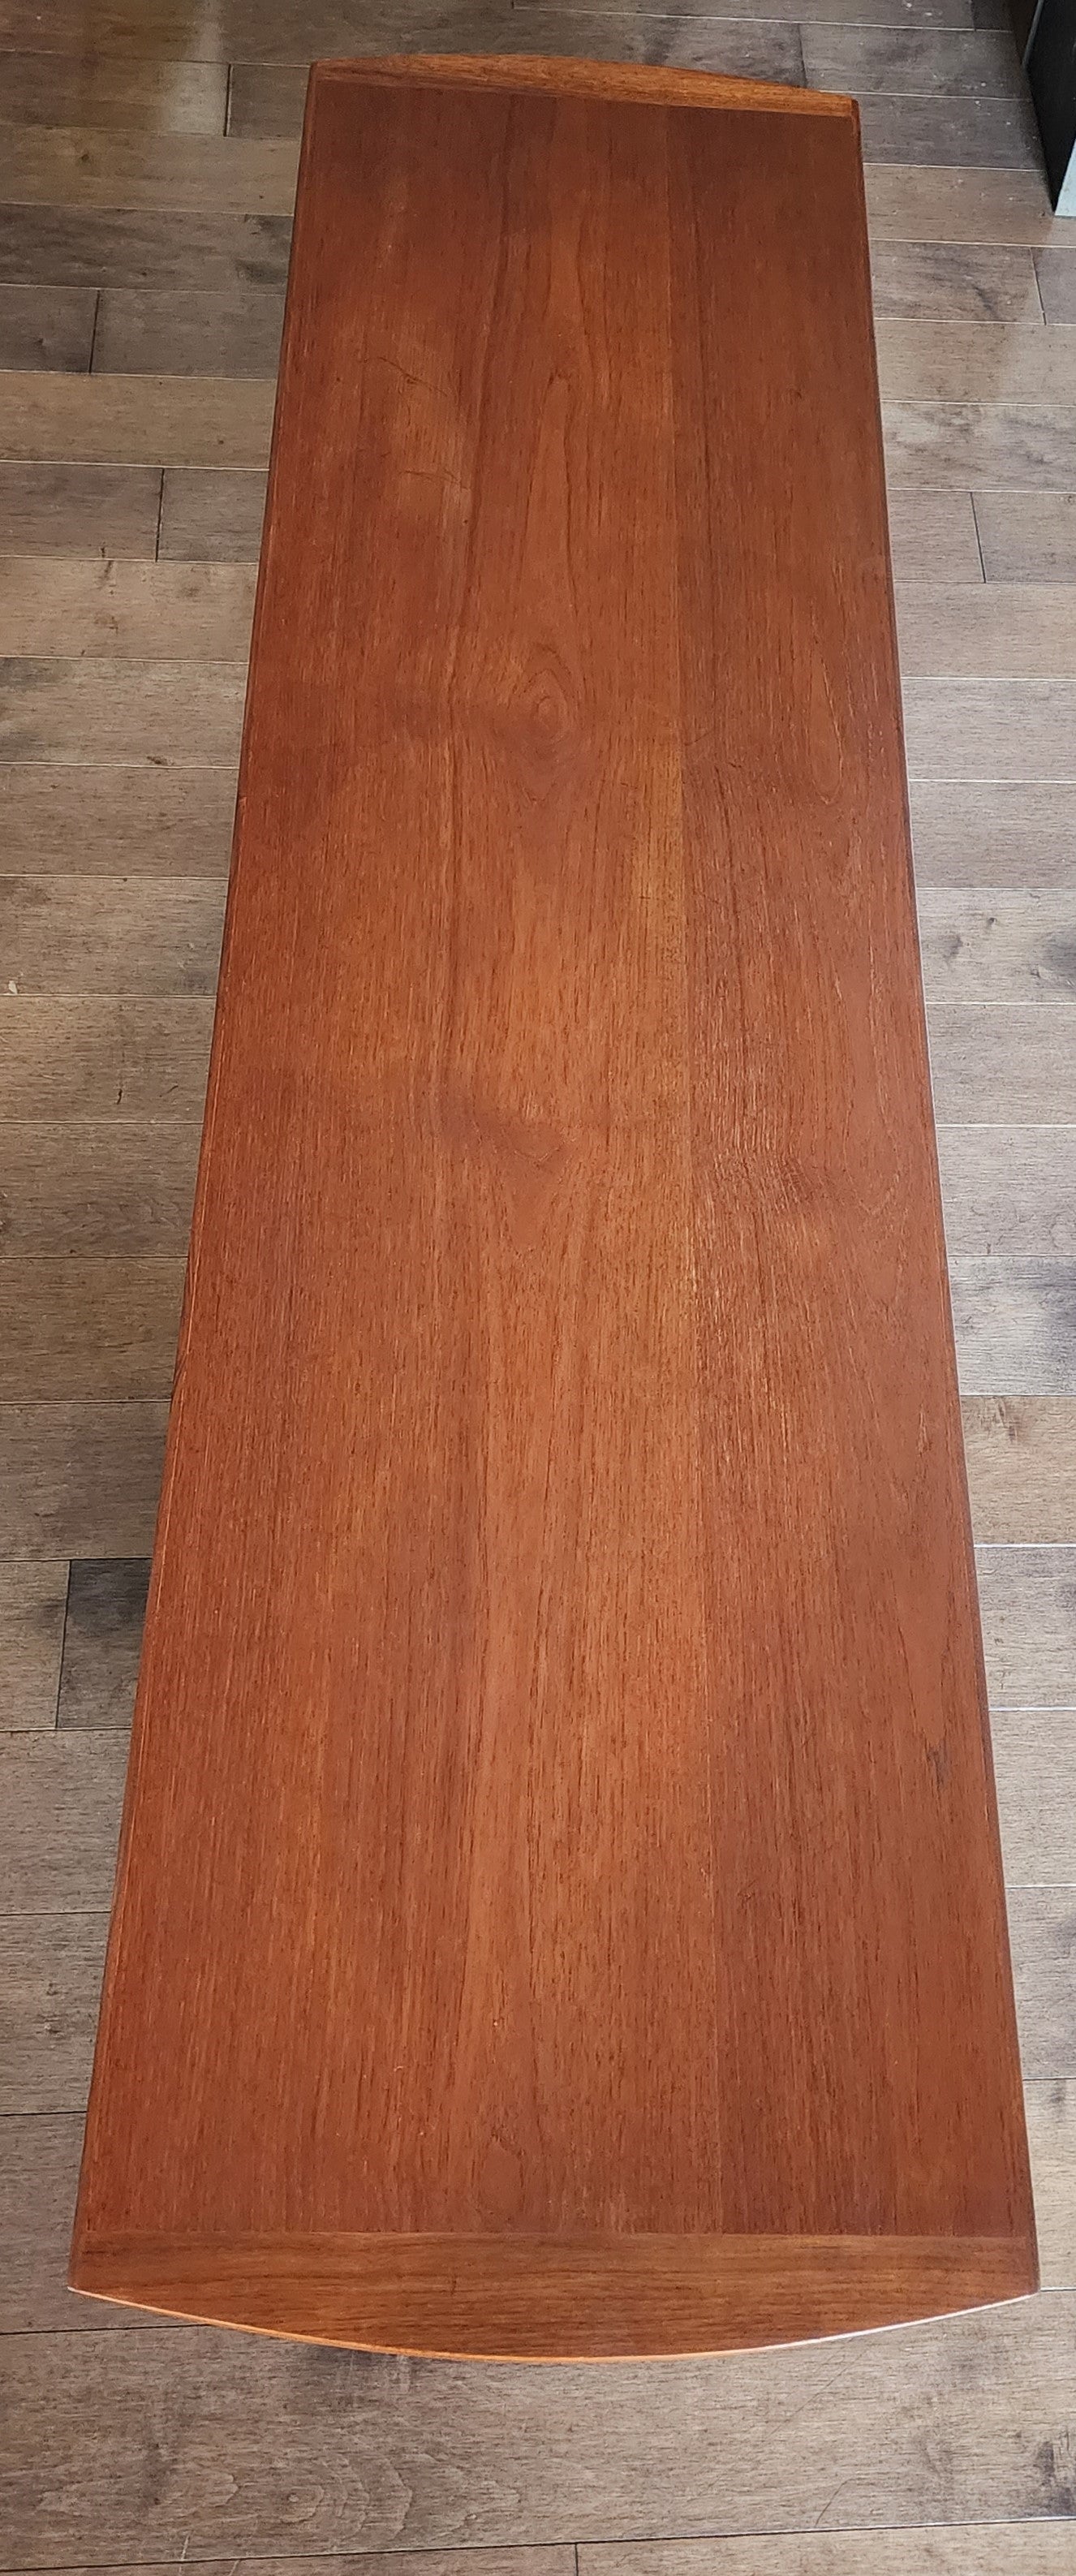 REFINISHED Mid Century Modern Teak Bench or Cocktail /Coffee Table 66" Long & Low